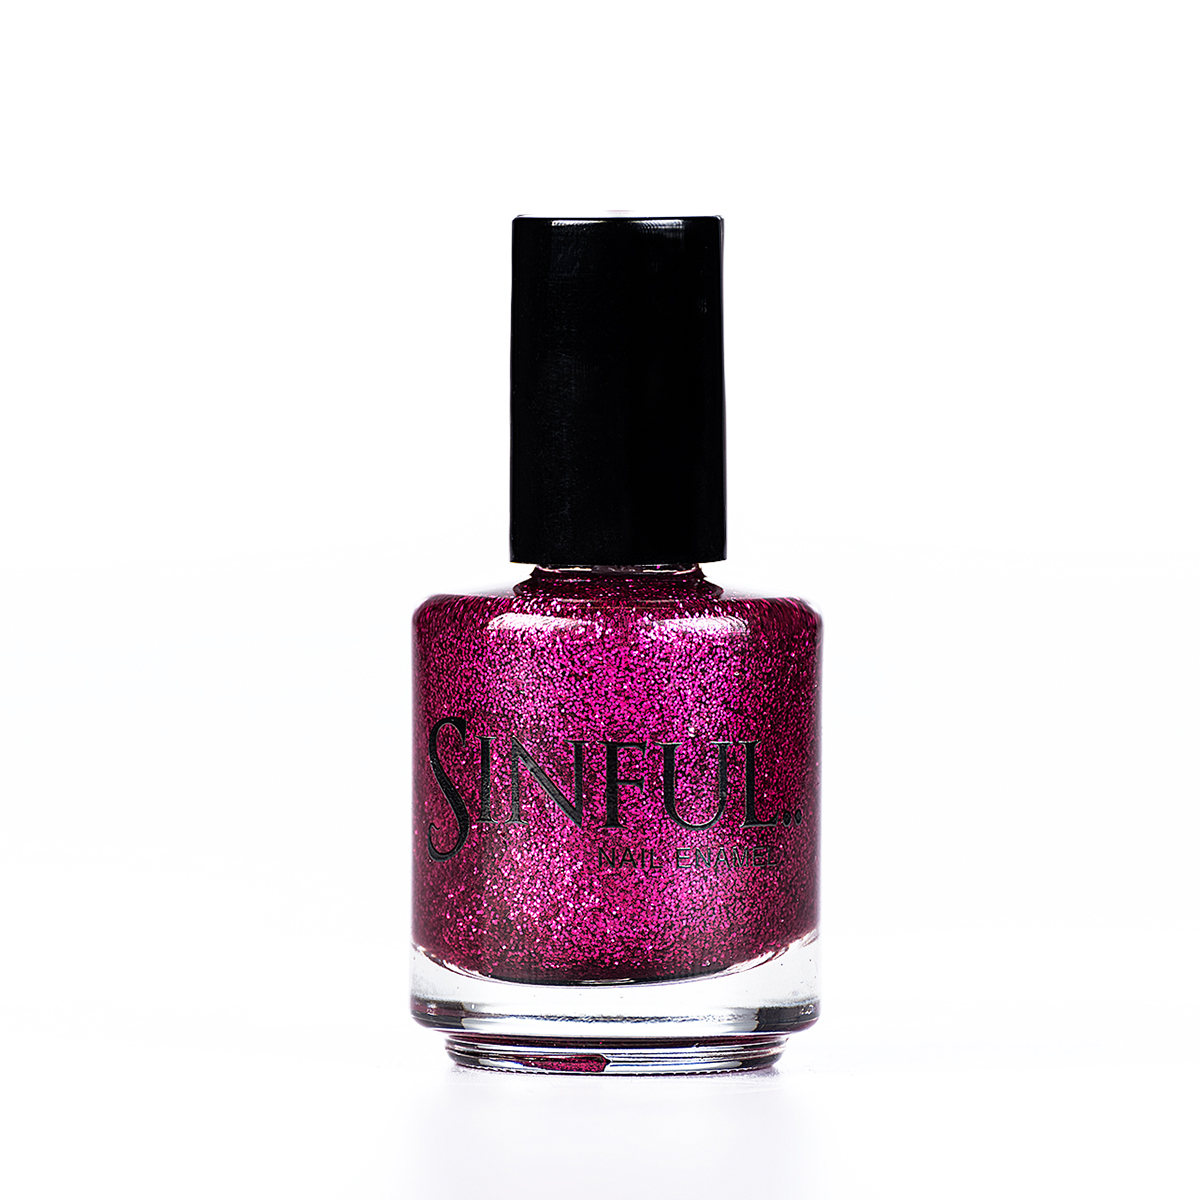 Fuchsia glitter Can be applied over a pink undercoat to give a quick, dazzling effect. For a super full nail glitter effect, apply 2-3 layers with a top coat. 15ml